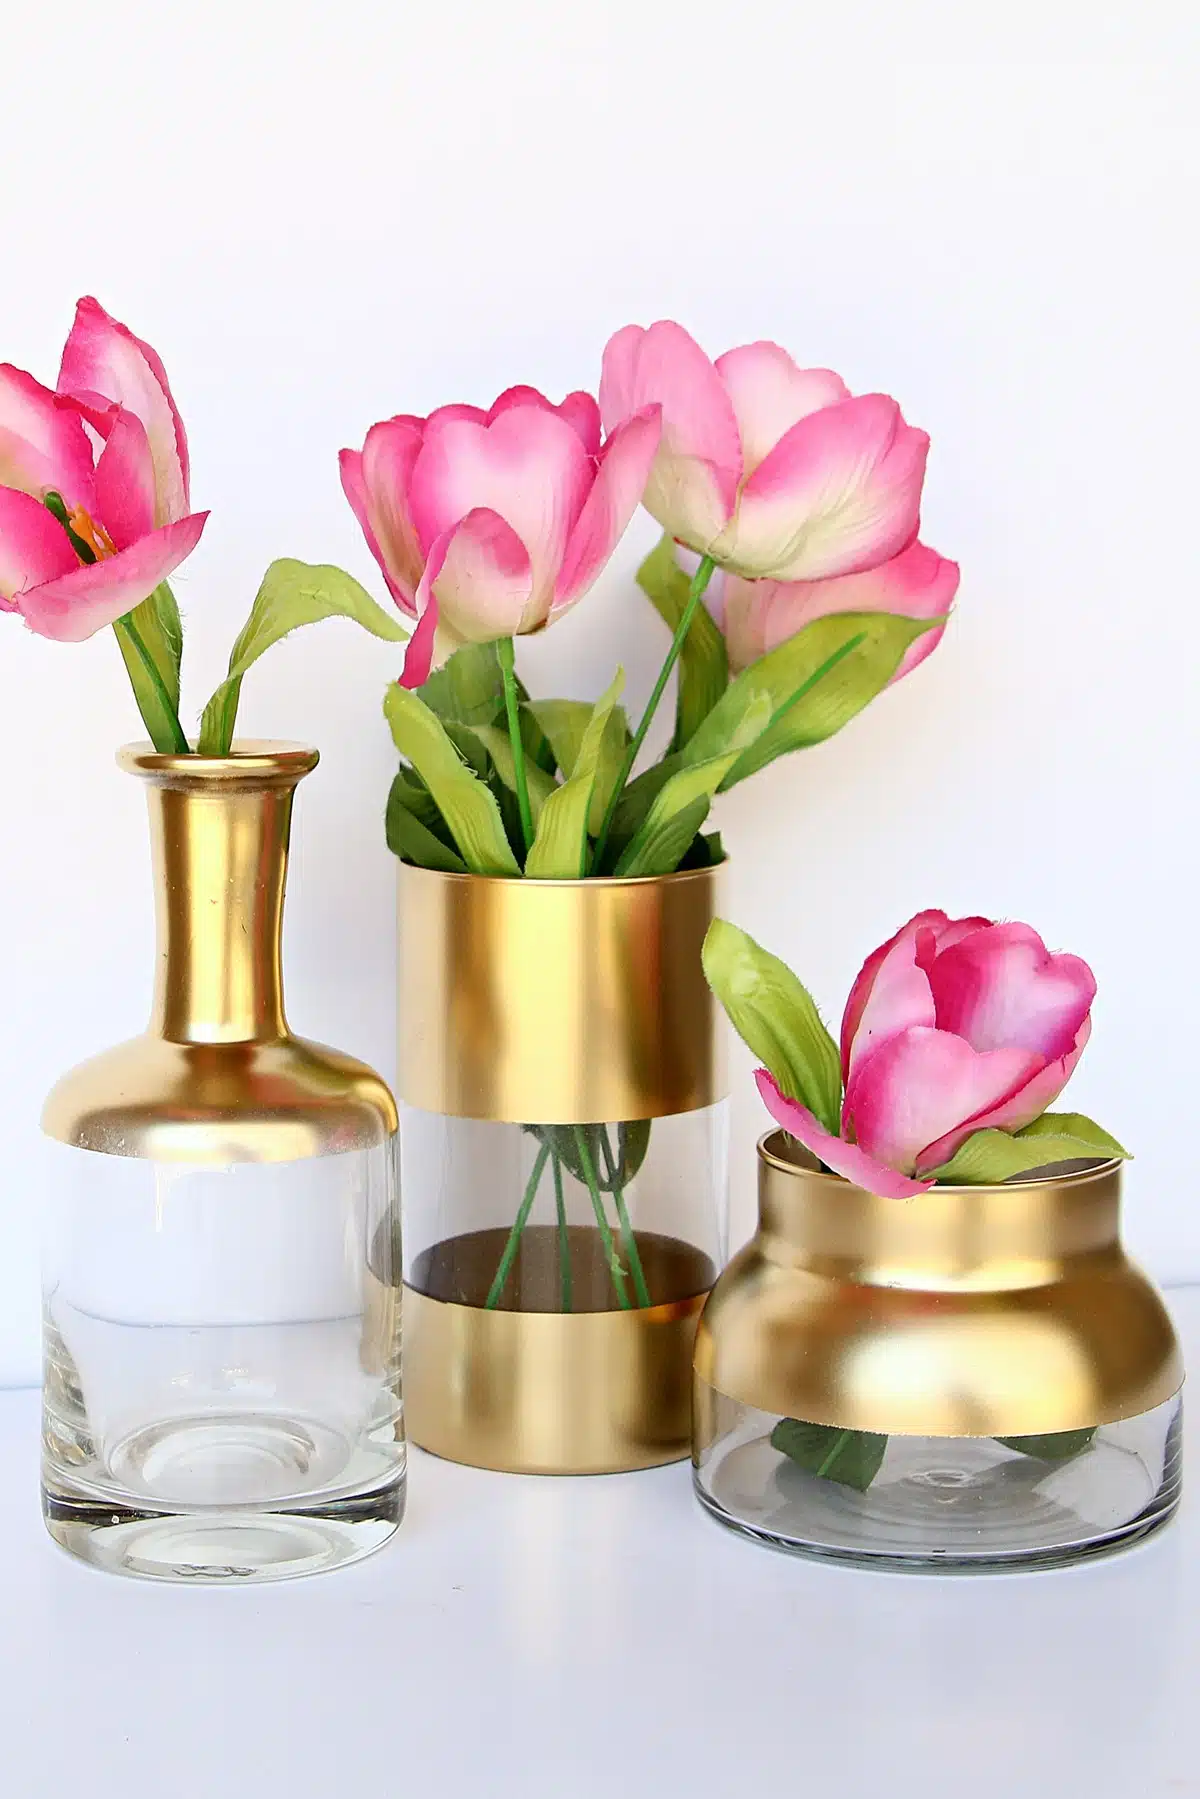 spray painted vases with pink tulips